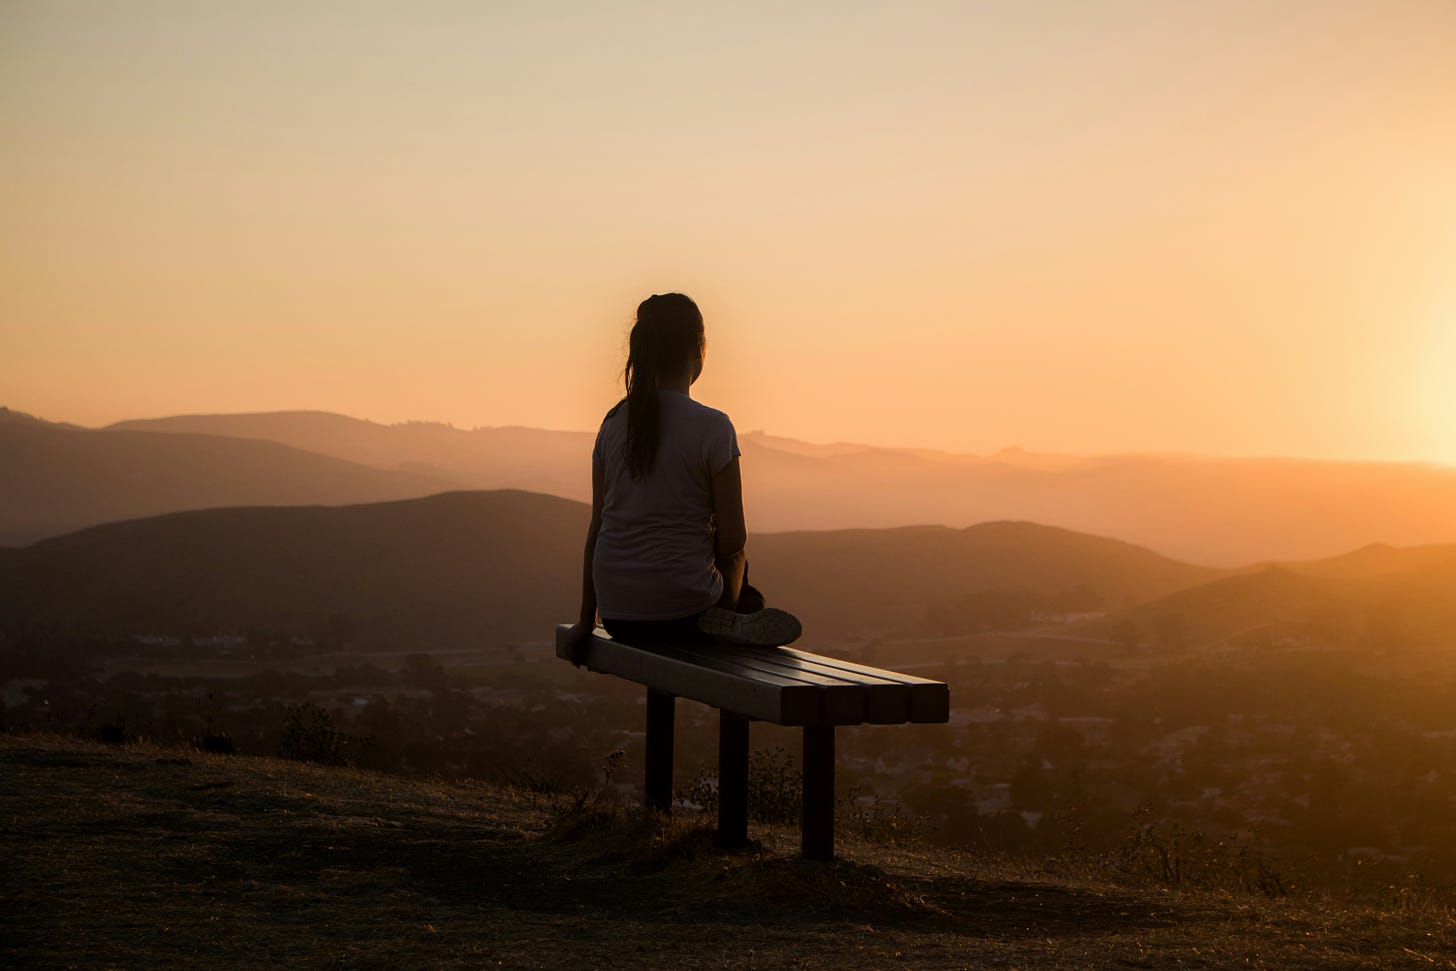 Recognising and showing gratitude to what does make us feel whole. A woman sits on a bench on the top of a hill overlooking a sunset in San Luis Obispo, California. [Credit: Sage Friedman on Unsplash]